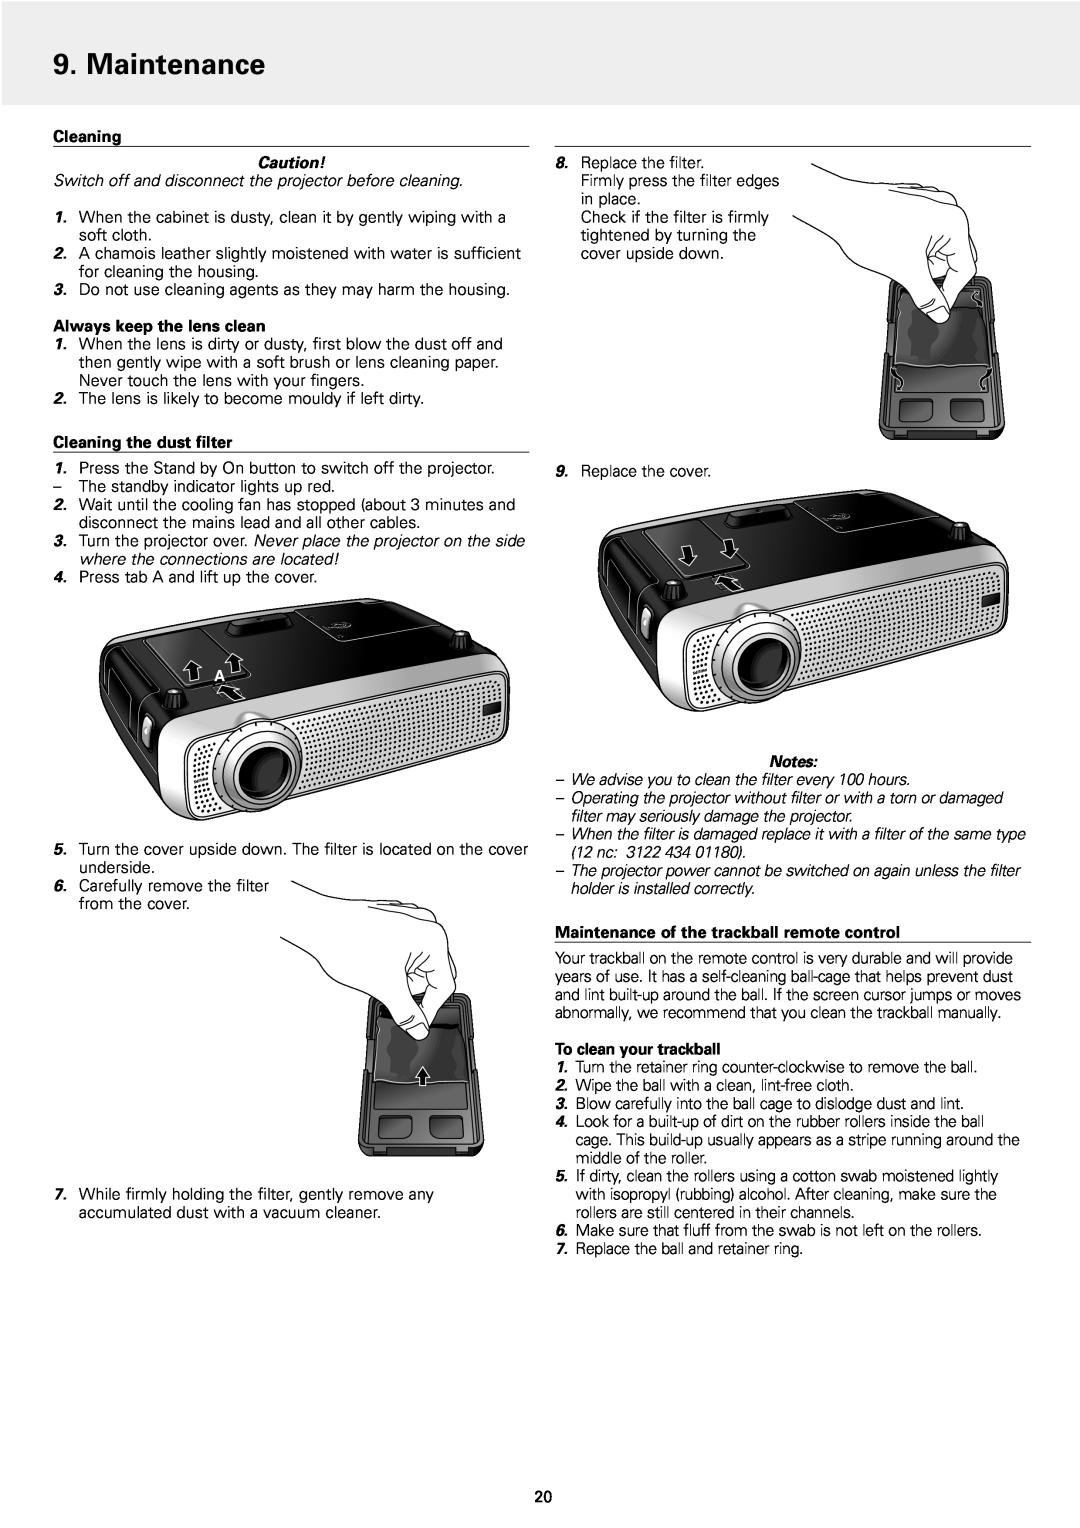 Philips 1 manual Maintenance, Always keep the lens clean, Cleaning the dust filter, To clean your trackball 